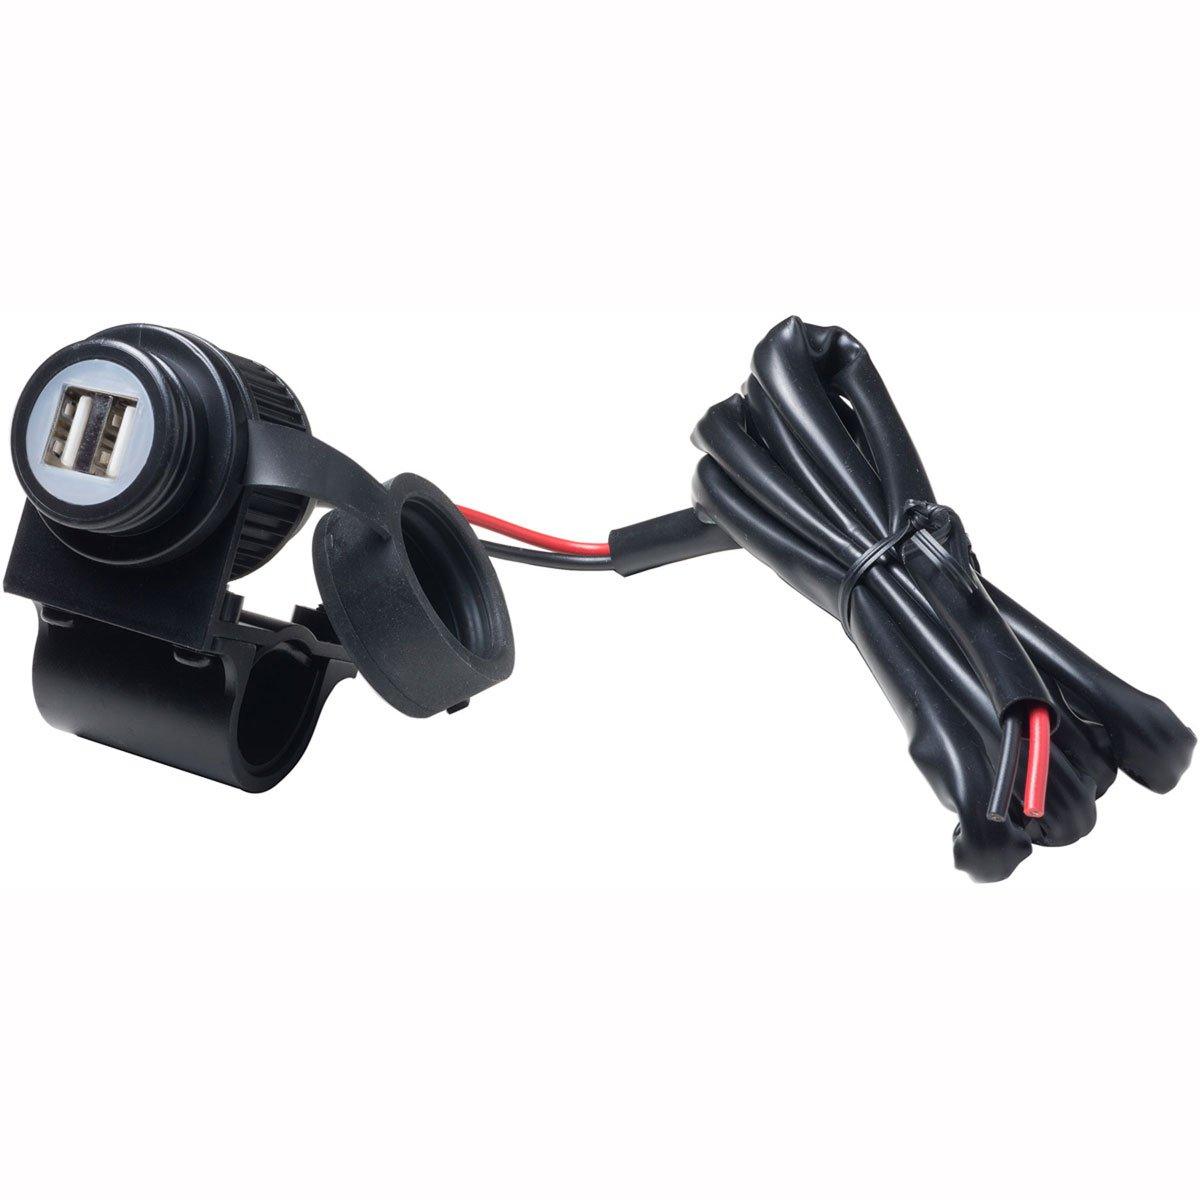 Interphone 12V 2 USB Moto Adaptor - Browse our range of Accessories: Headsets - getgearedshop 